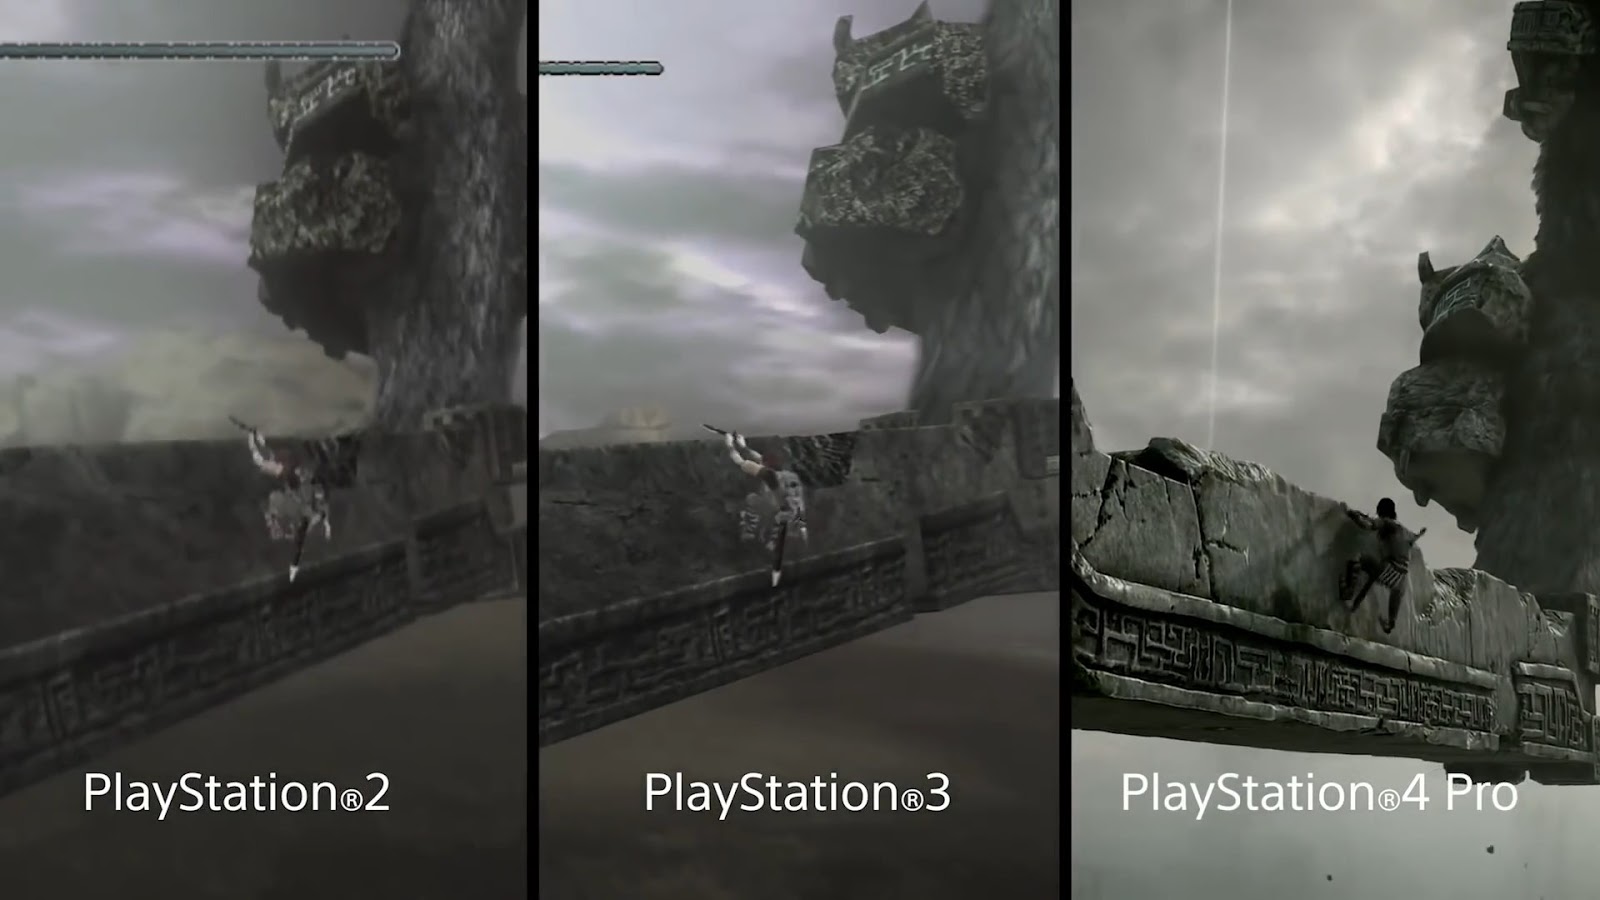 pc ps2 emulator bios for shadow of the colossus